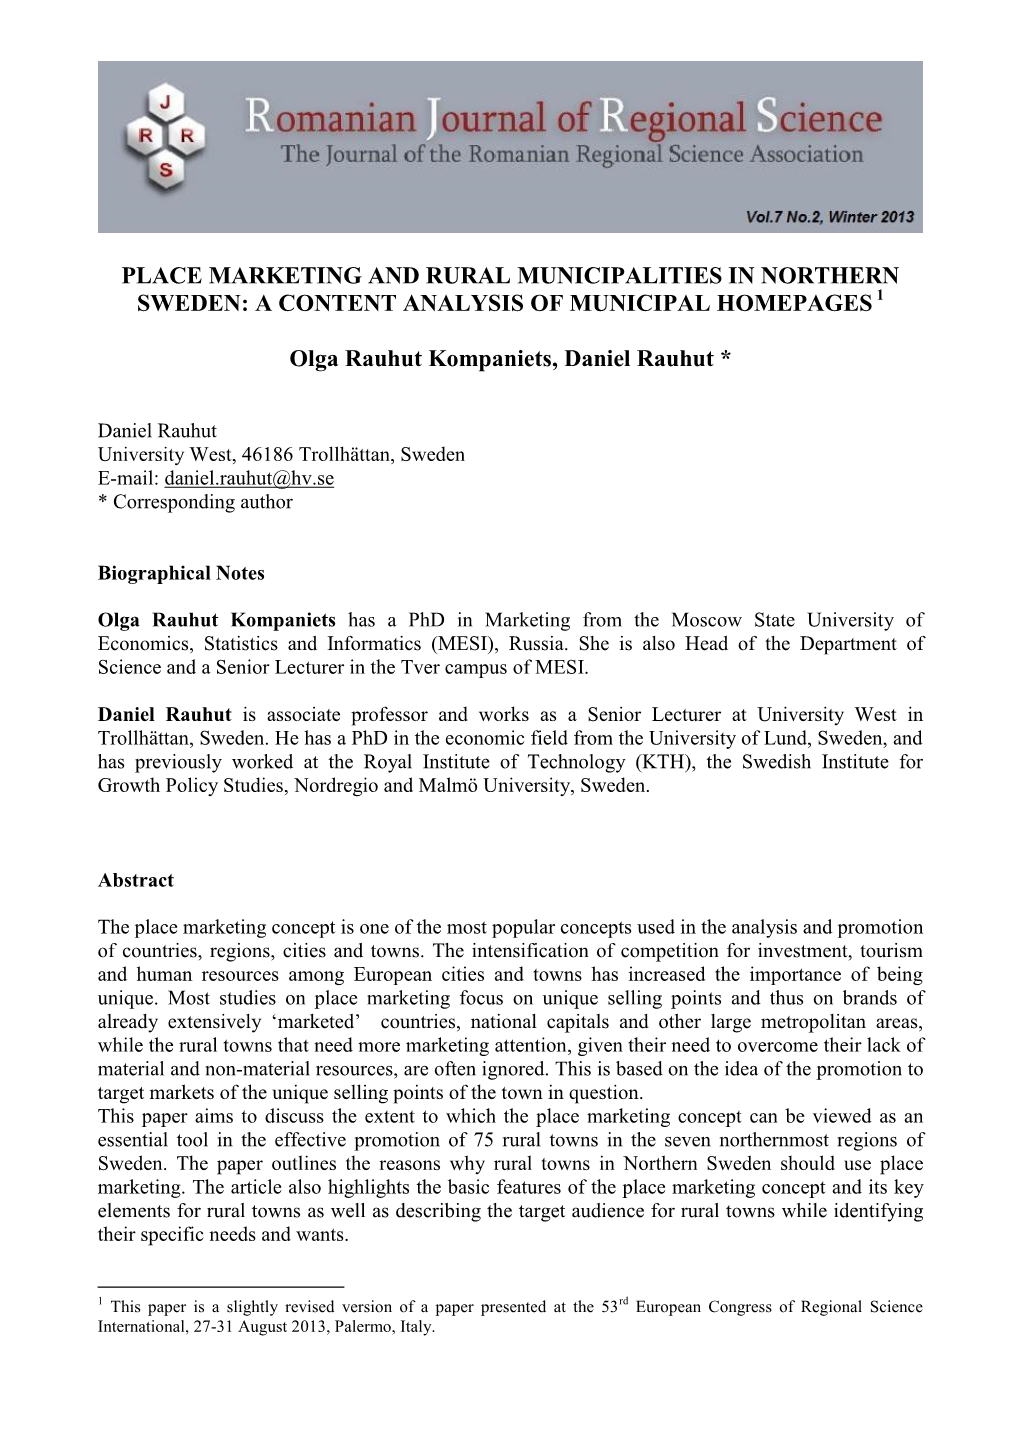 Olga Rauhut Kompaniets and Daniel Rauhut - Place Marketing and Rural Municipalities in Northern Sweden: a Content Analysis of Municipal Homepages